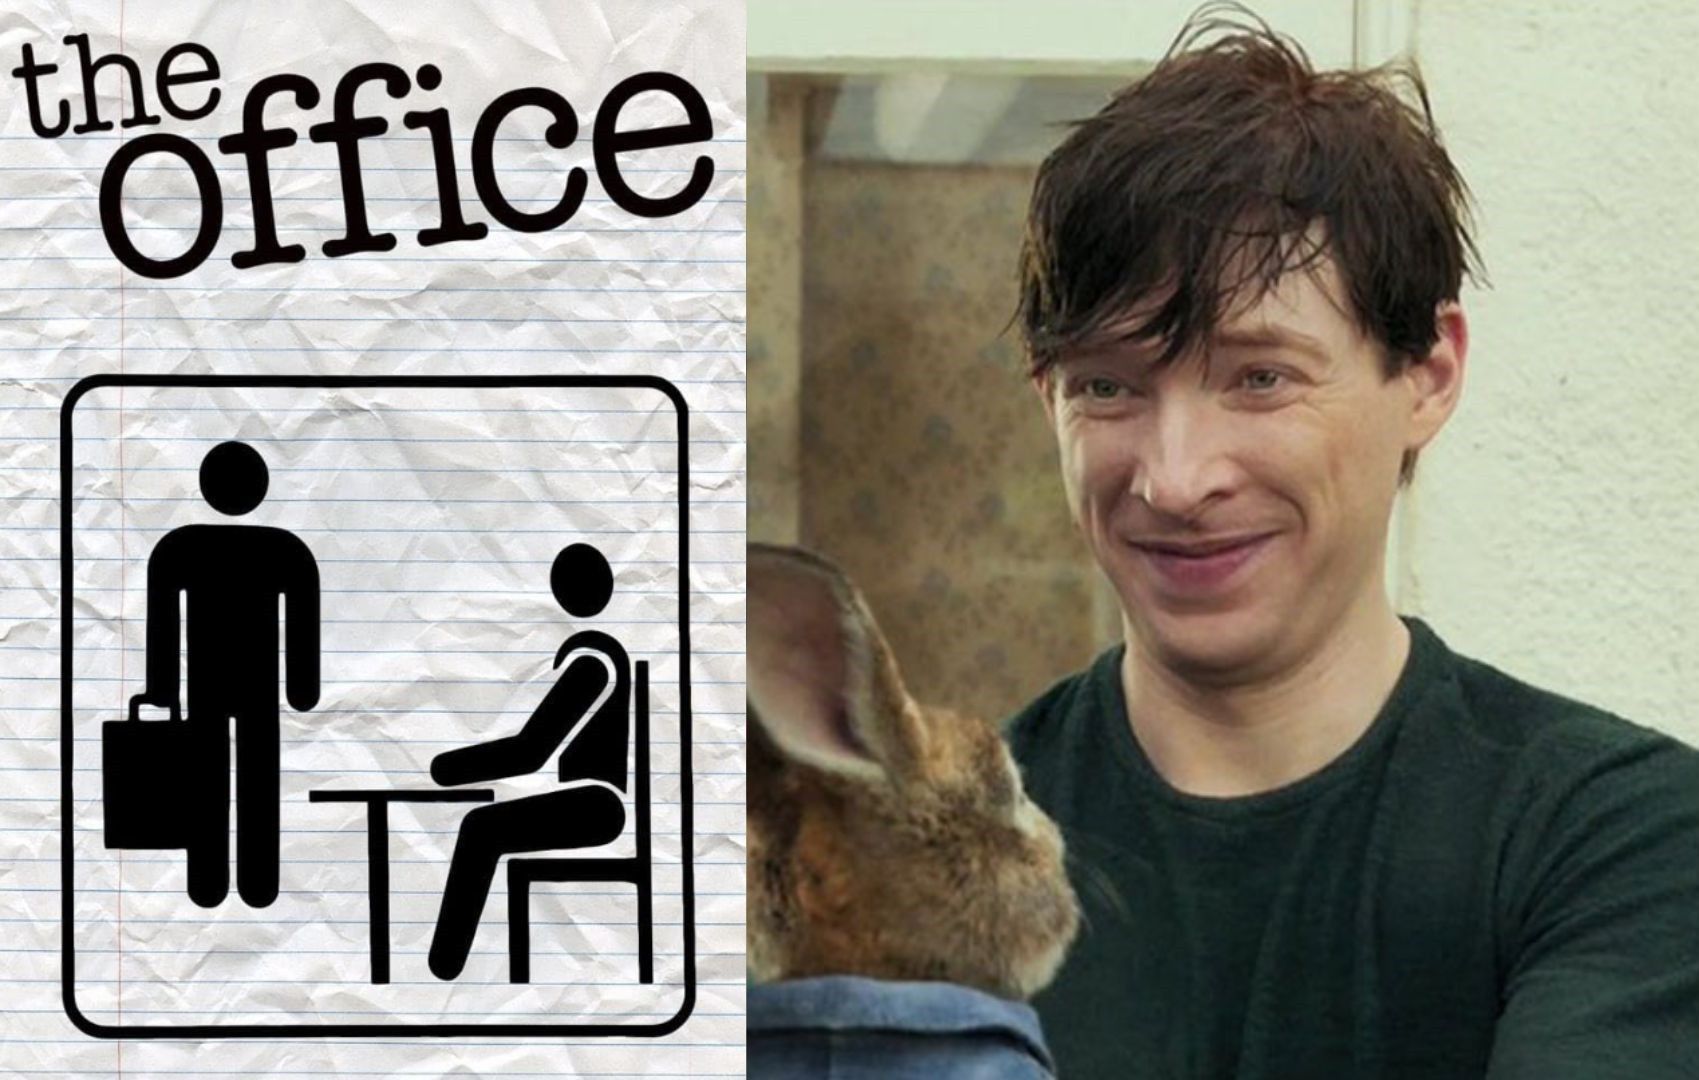 ‘The Office’ follow-up show casts Domhnall Gleeson, Sabrina Impacciatore